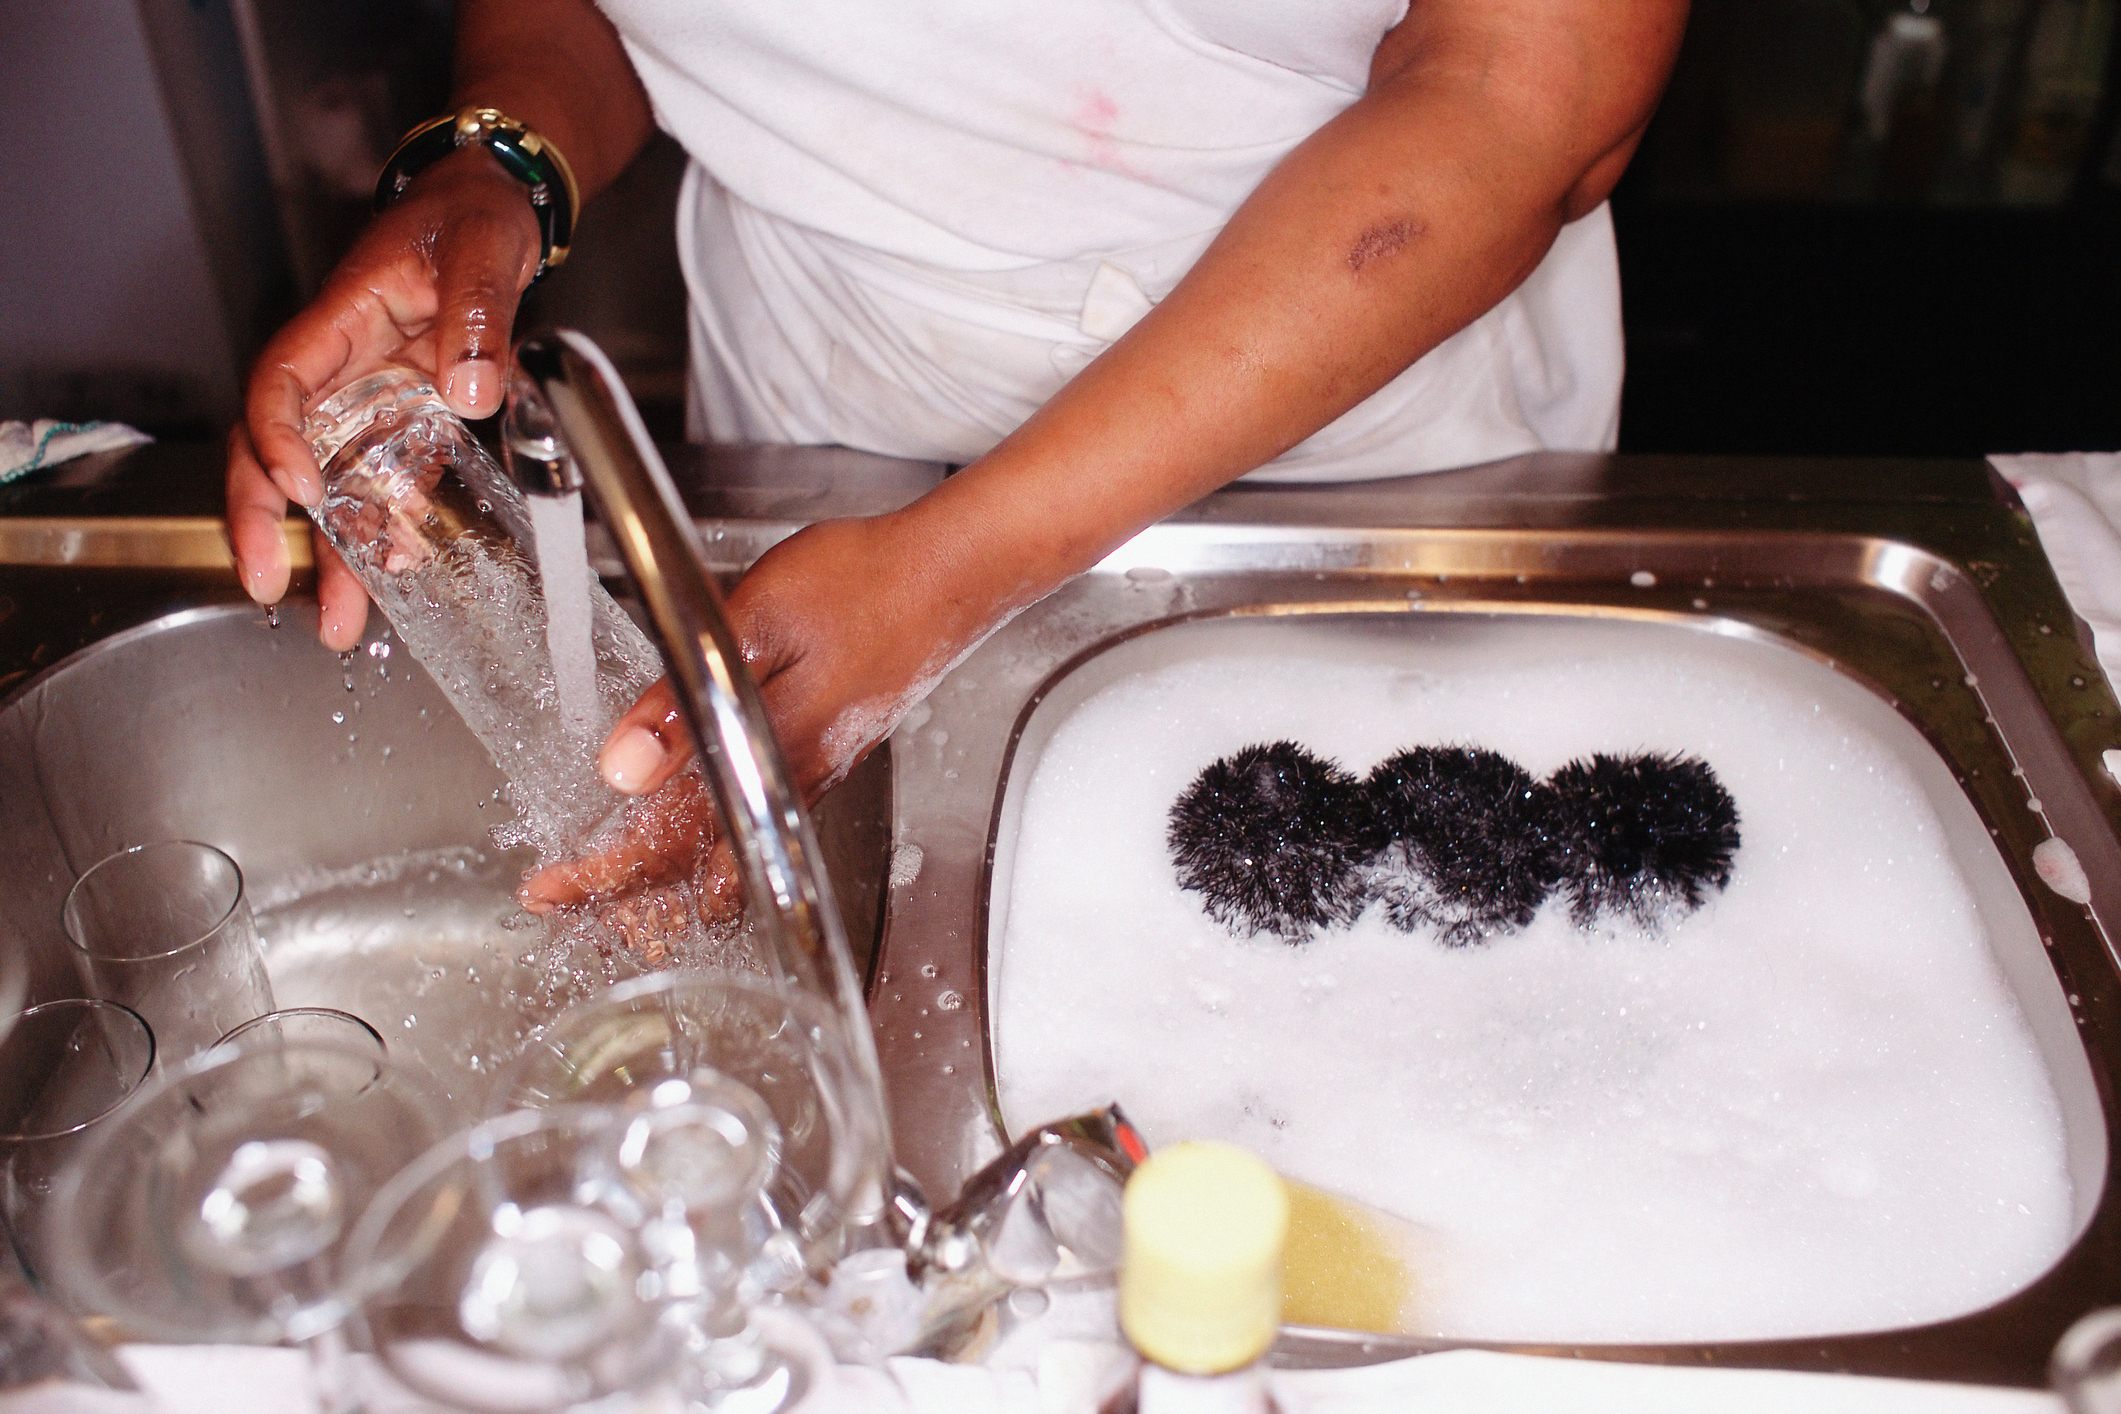 A person washing dishes